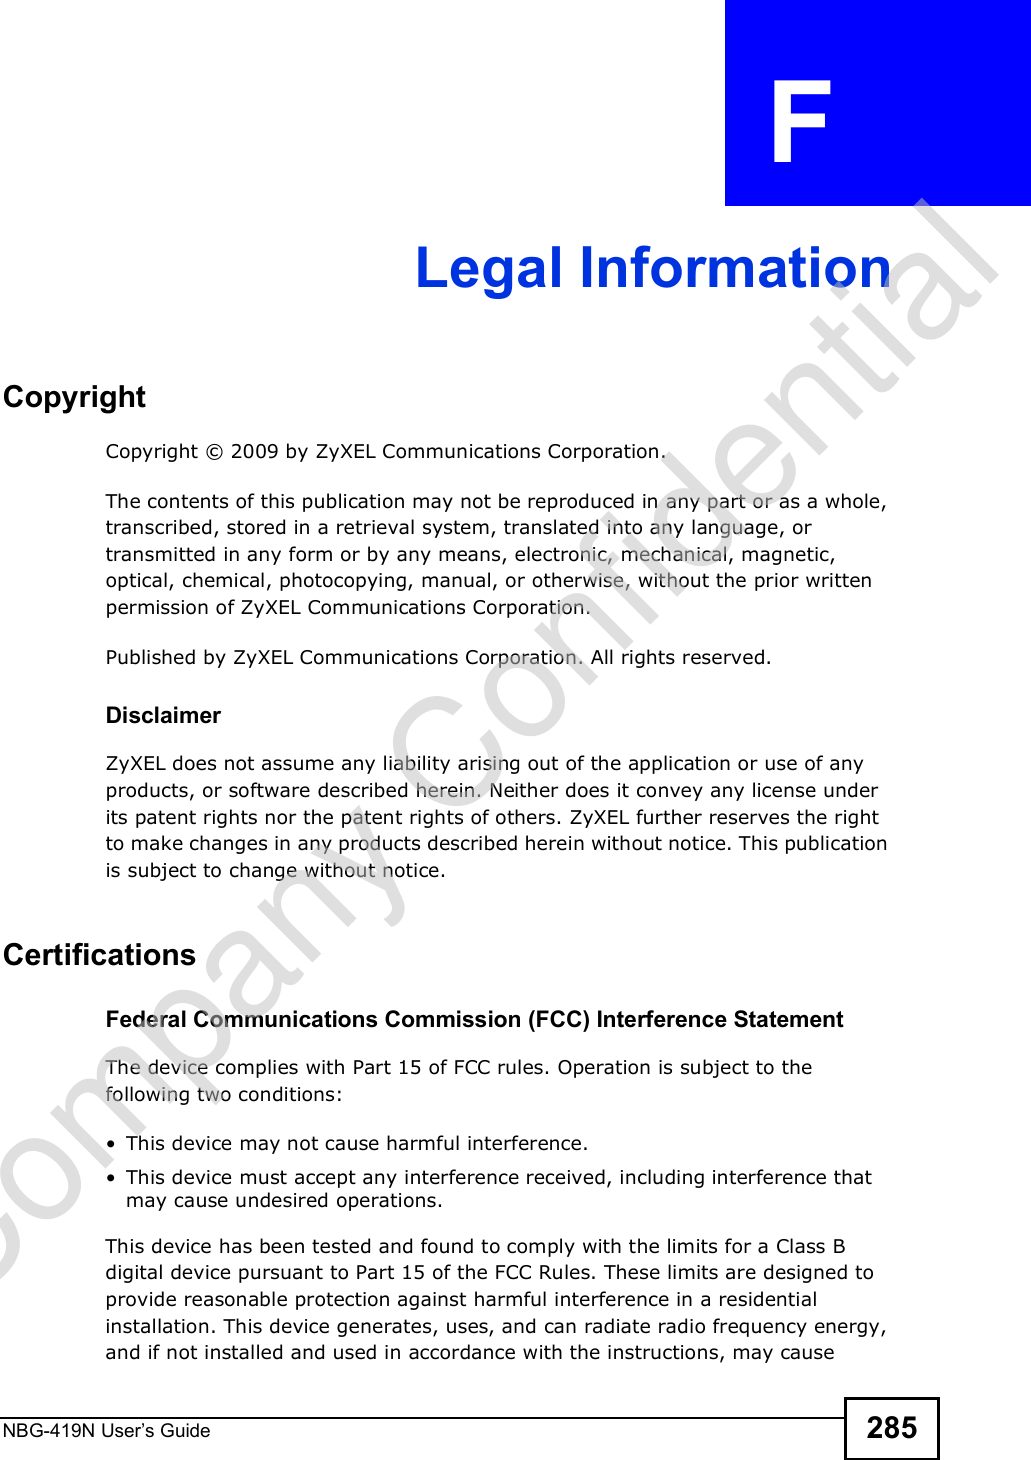 NBG-419N User s Guide 285APPENDIX  F Legal InformationCopyrightCopyright © 2009 by ZyXEL Communications Corporation.The contents of this publication may not be reproduced in any part or as a whole, transcribed, stored in a retrieval system, translated into any language, or transmitted in any form or by any means, electronic, mechanical, magnetic, optical, chemical, photocopying, manual, or otherwise, without the prior written permission of ZyXEL Communications Corporation.Published by ZyXEL Communications Corporation. All rights reserved.DisclaimerZyXEL does not assume any liability arising out of the application or use of any products, or software described herein. Neither does it convey any license under its patent rights nor the patent rights of others. ZyXEL further reserves the right to make changes in any products described herein without notice. This publication is subject to change without notice.Certifications Federal Communications Commission (FCC) Interference StatementThe device complies with Part 15 of FCC rules. Operation is subject to the following two conditions: This device may not cause harmful interference. This device must accept any interference received, including interference that may cause undesired operations.This device has been tested and found to comply with the limits for a Class B digital device pursuant to Part 15 of the FCC Rules. These limits are designed to provide reasonable protection against harmful interference in a residential installation. This device generates, uses, and can radiate radio frequency energy, and if not installed and used in accordance with the instructions, may cause Company Confidential